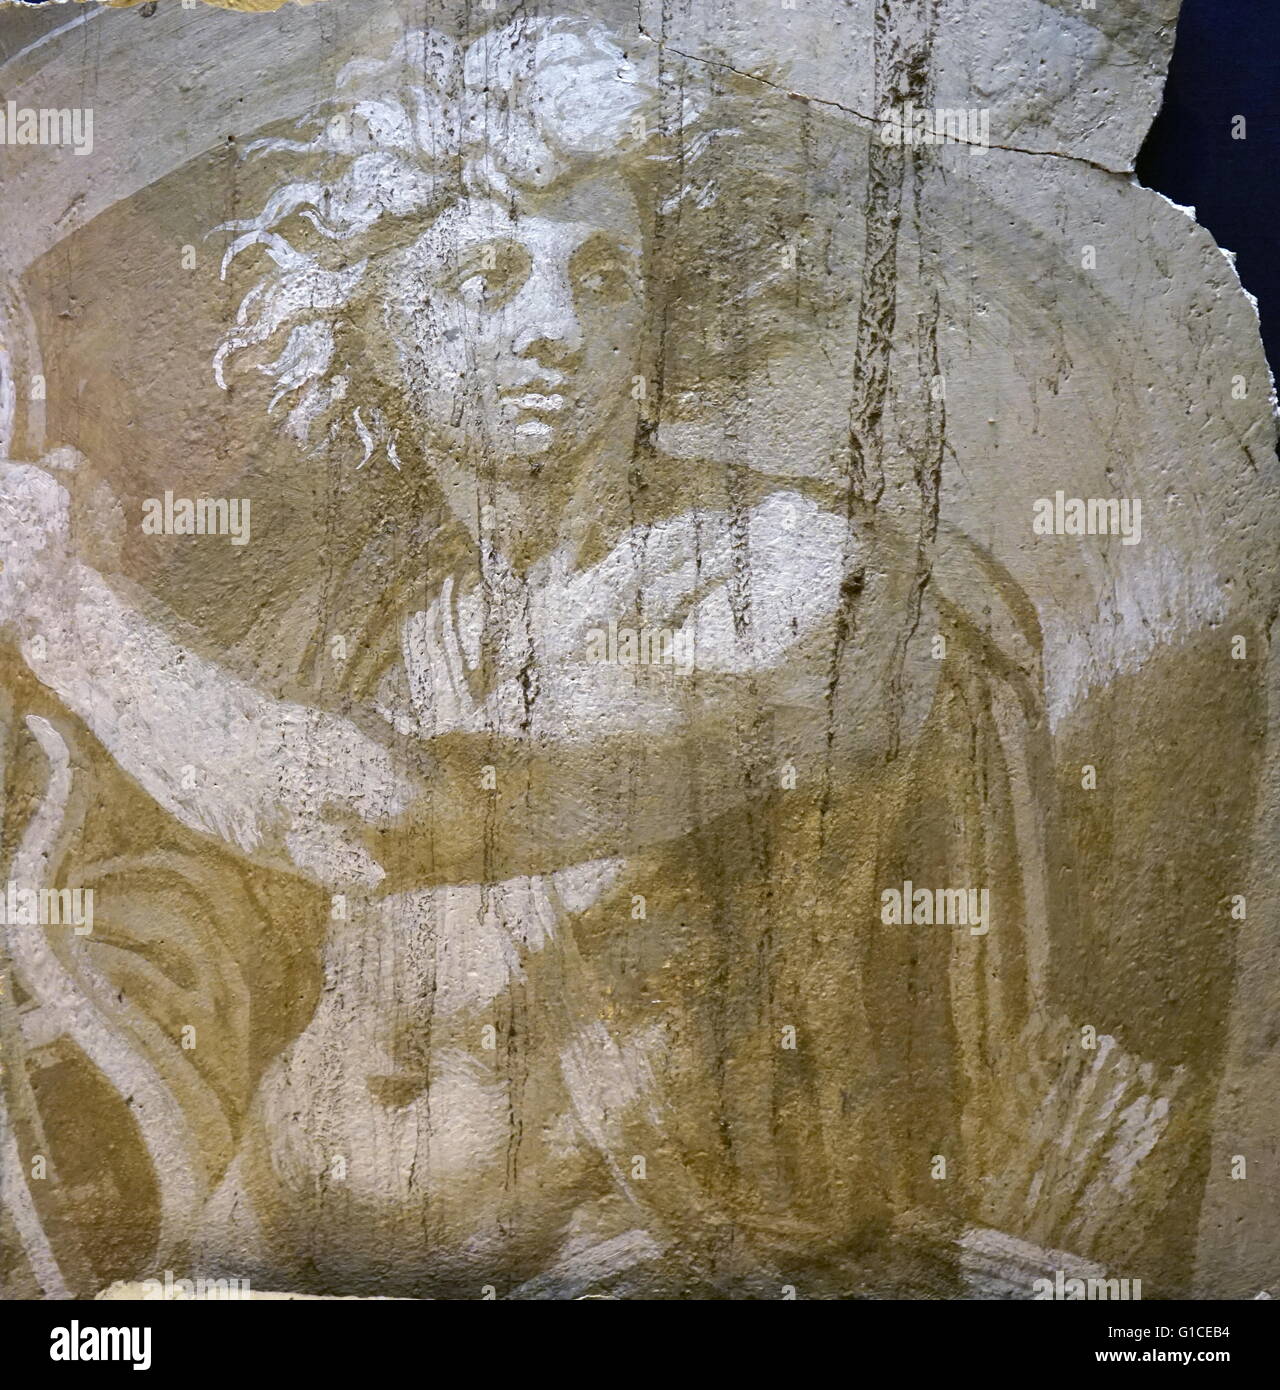 Piece of painted plaster depicting Apollo. By Hendrick Goltzius (1558-1617) German-born Dutch printmaker, draftsman, and painter. Dated 16th Century Stock Photo